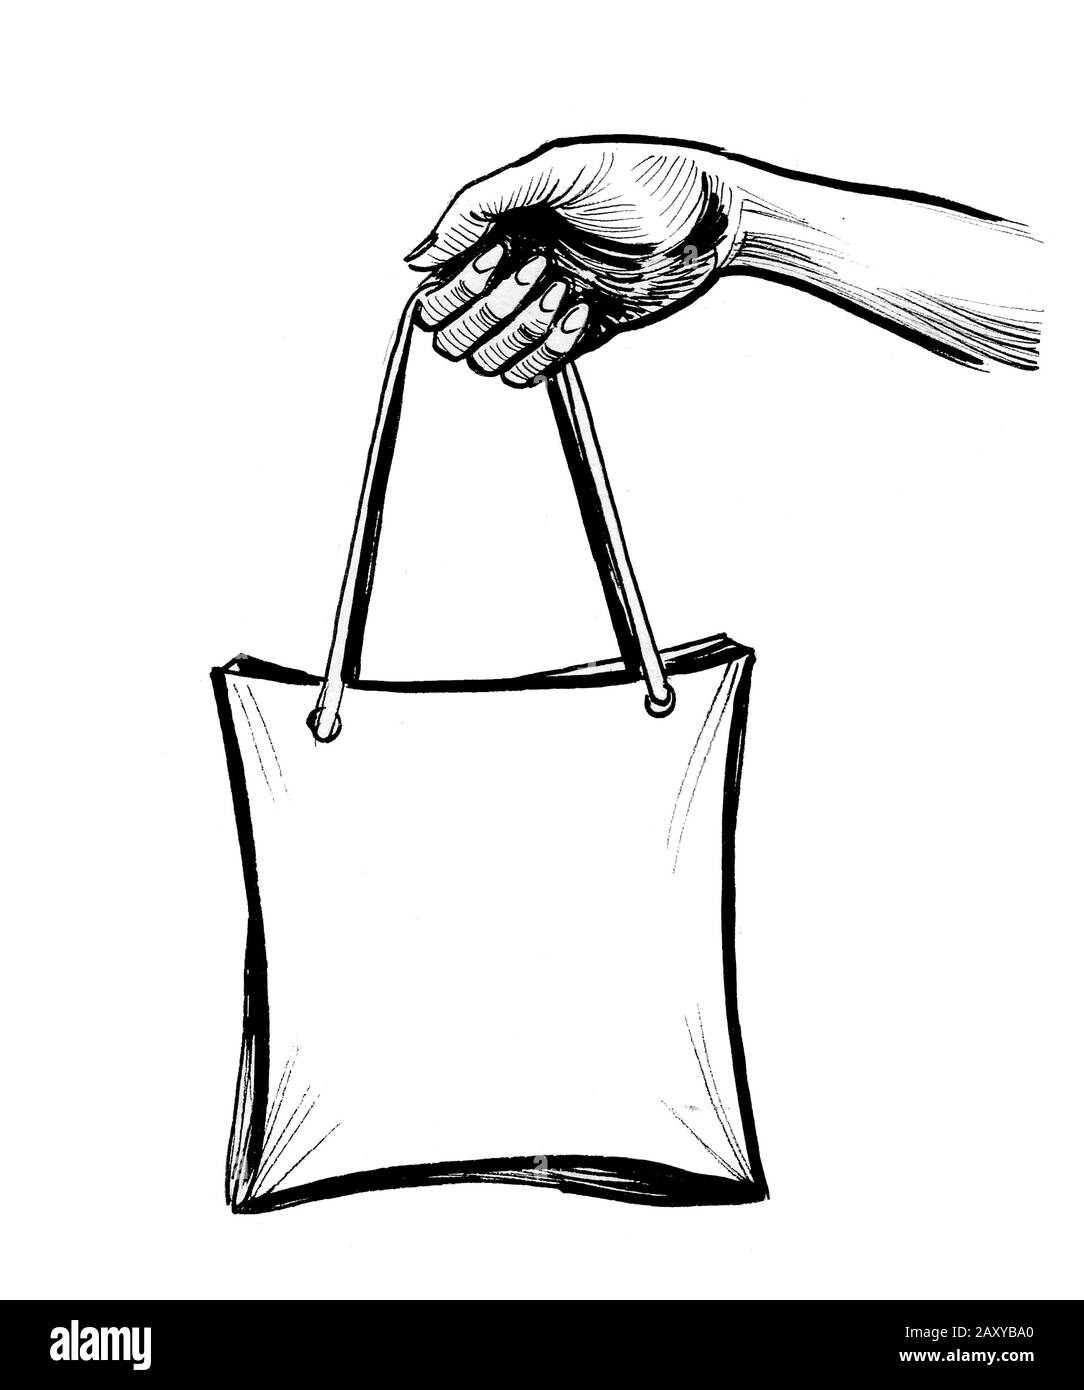 Bag drawing Cut Out Stock Images & Pictures - Alamy